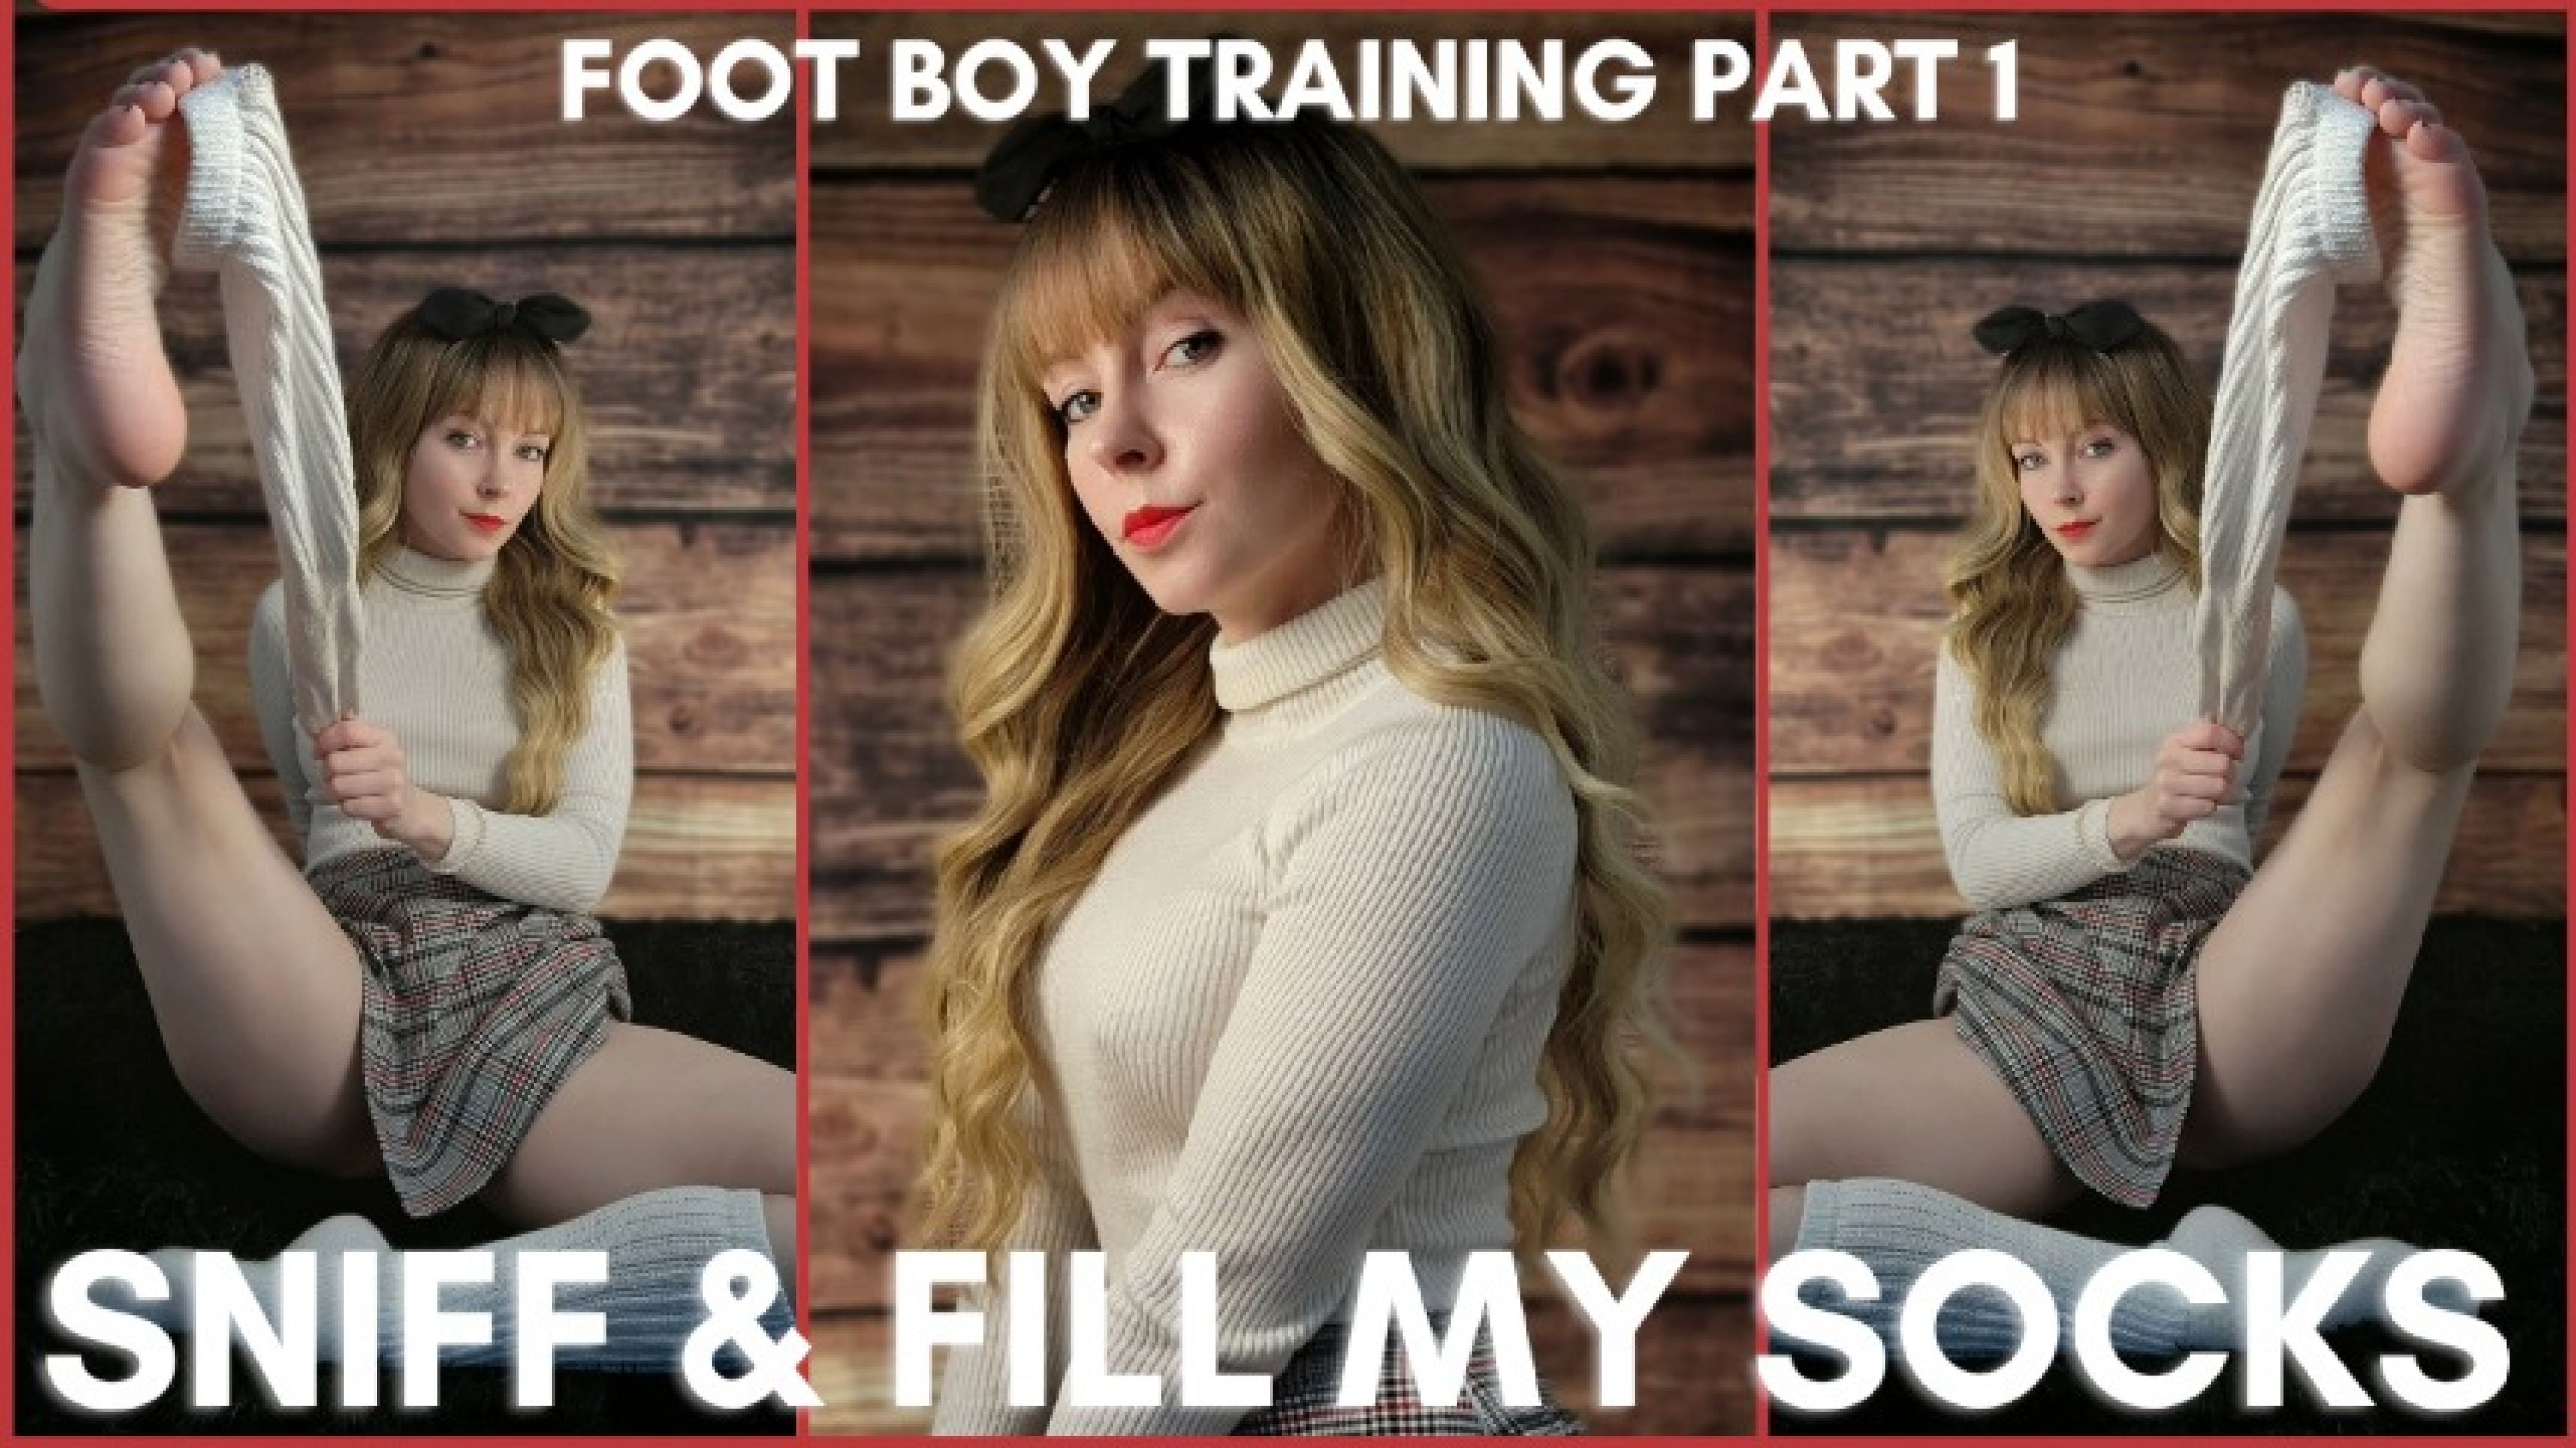 leaked Foot Boy Training Part 1 - Sniff and Fill My Socks video thumbnail